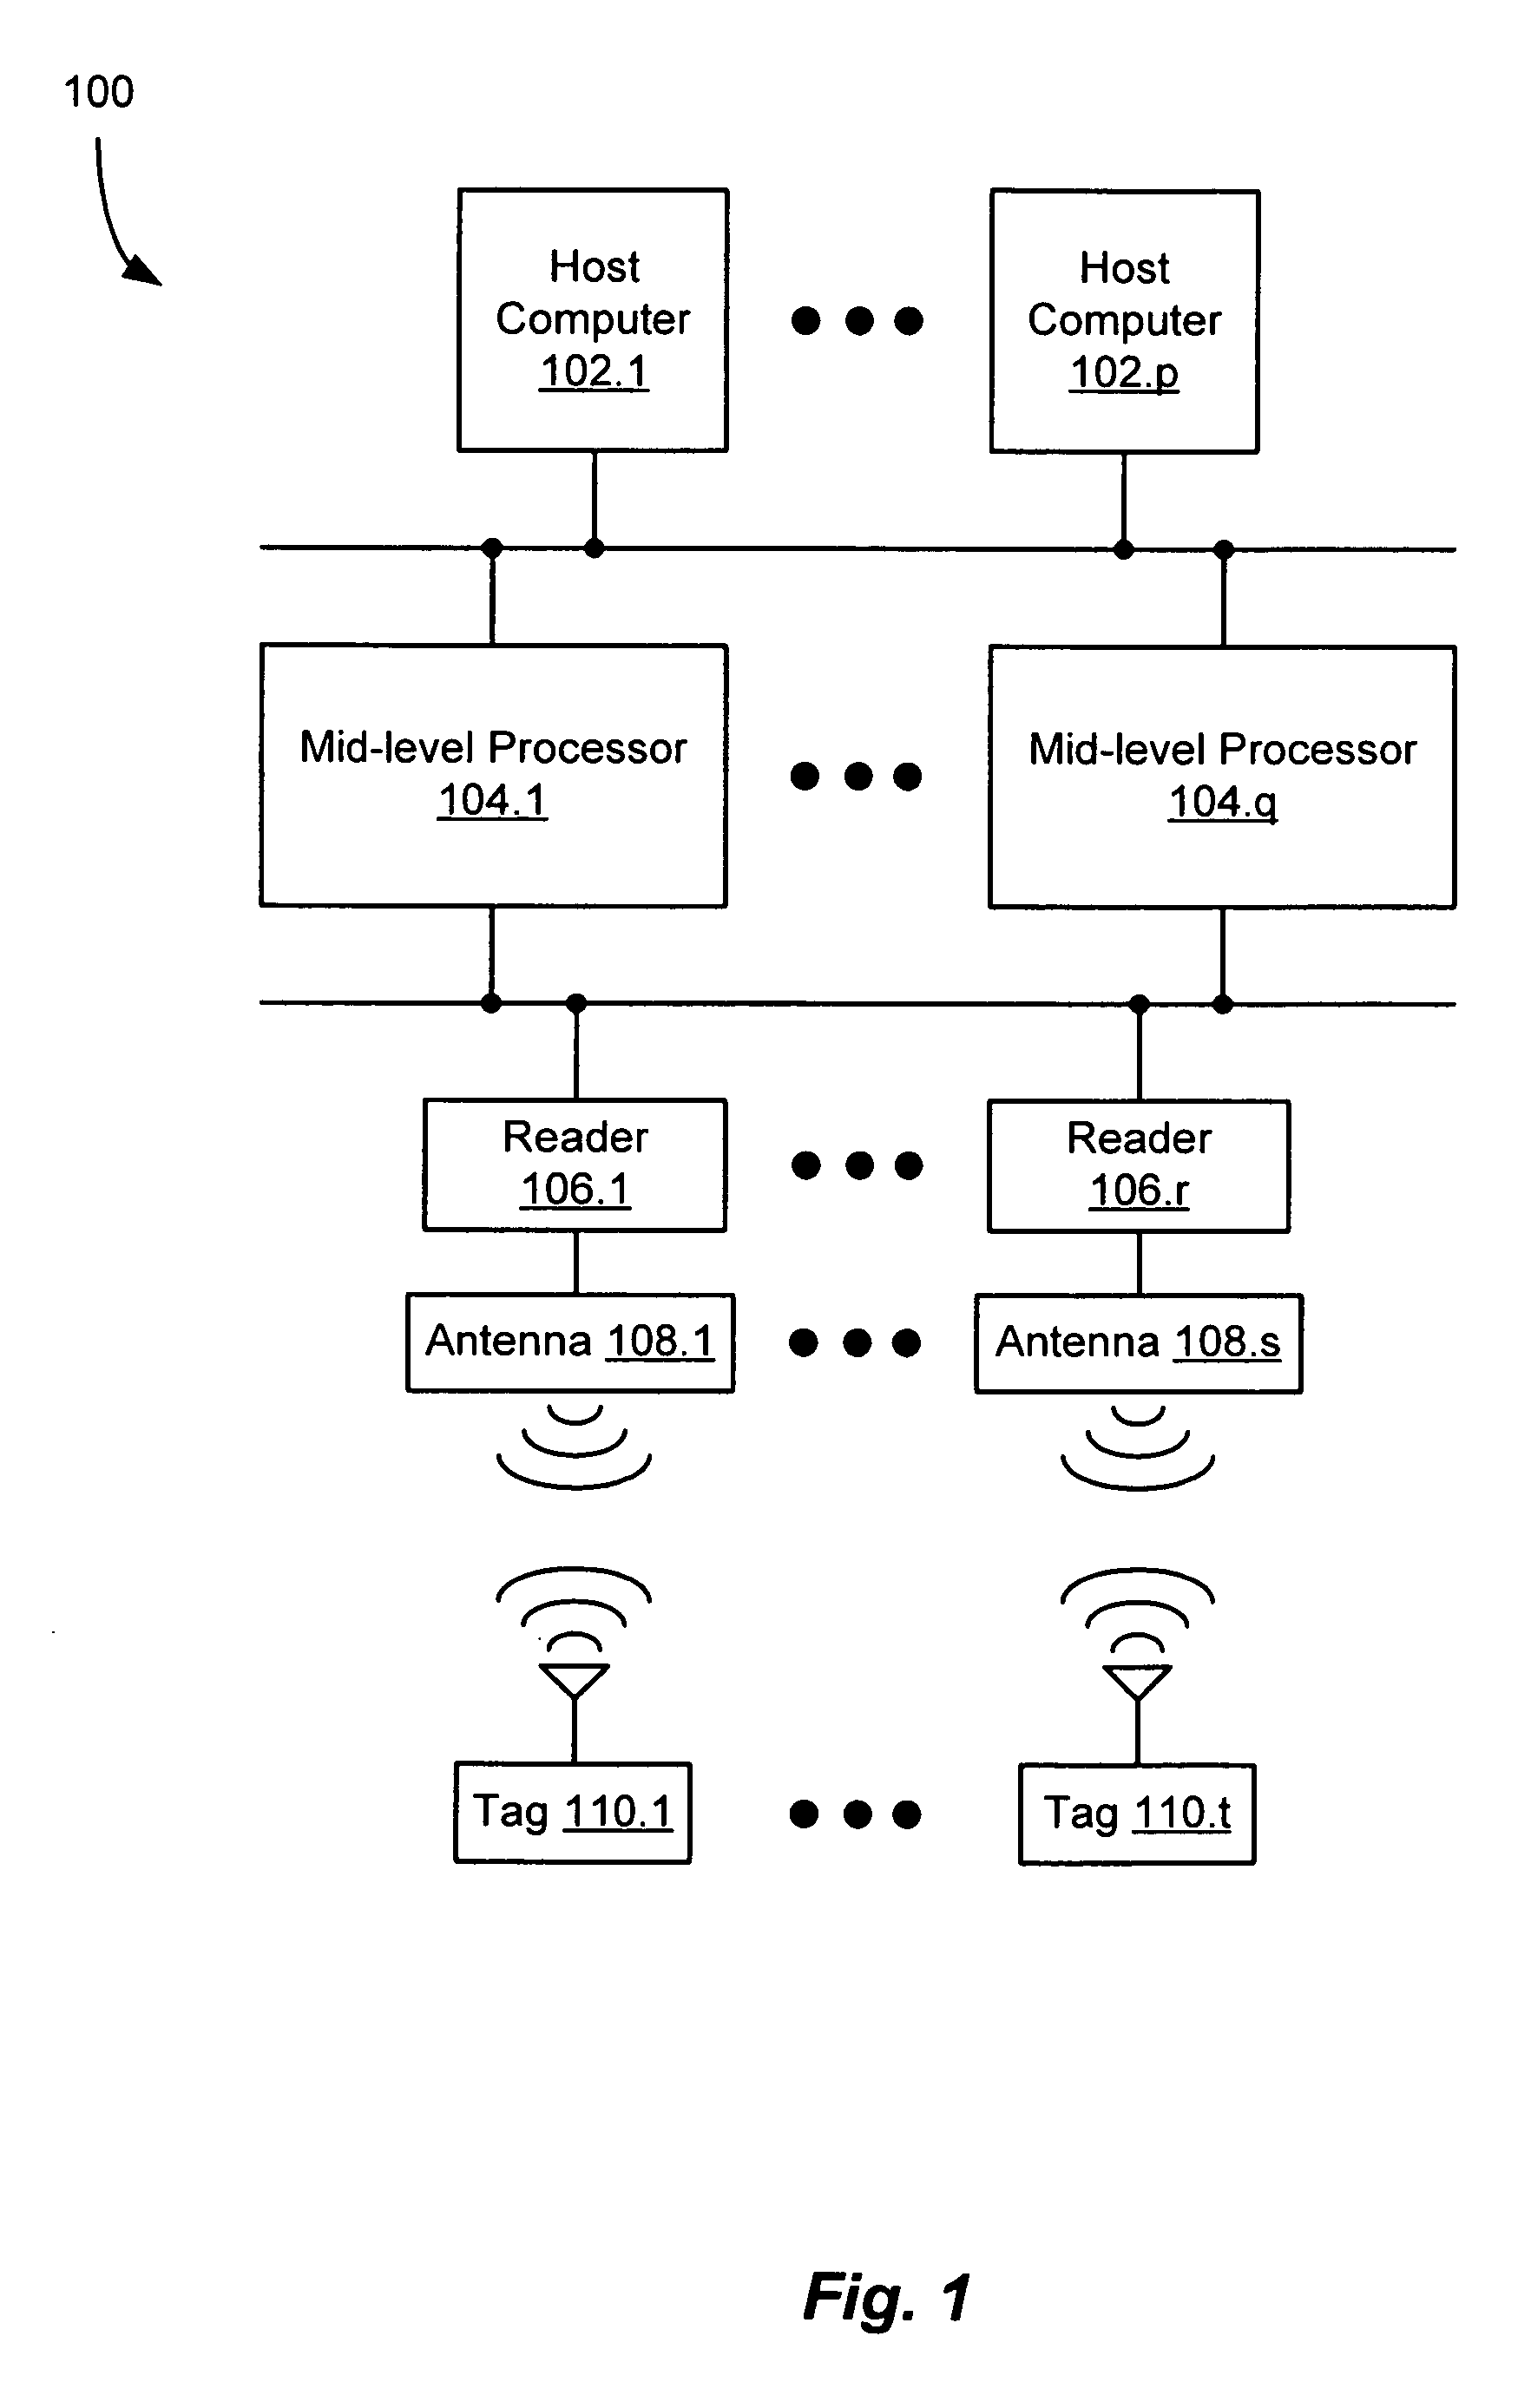 Configuration management system and method for use in an RFID system including a multiplicity of RFID readers